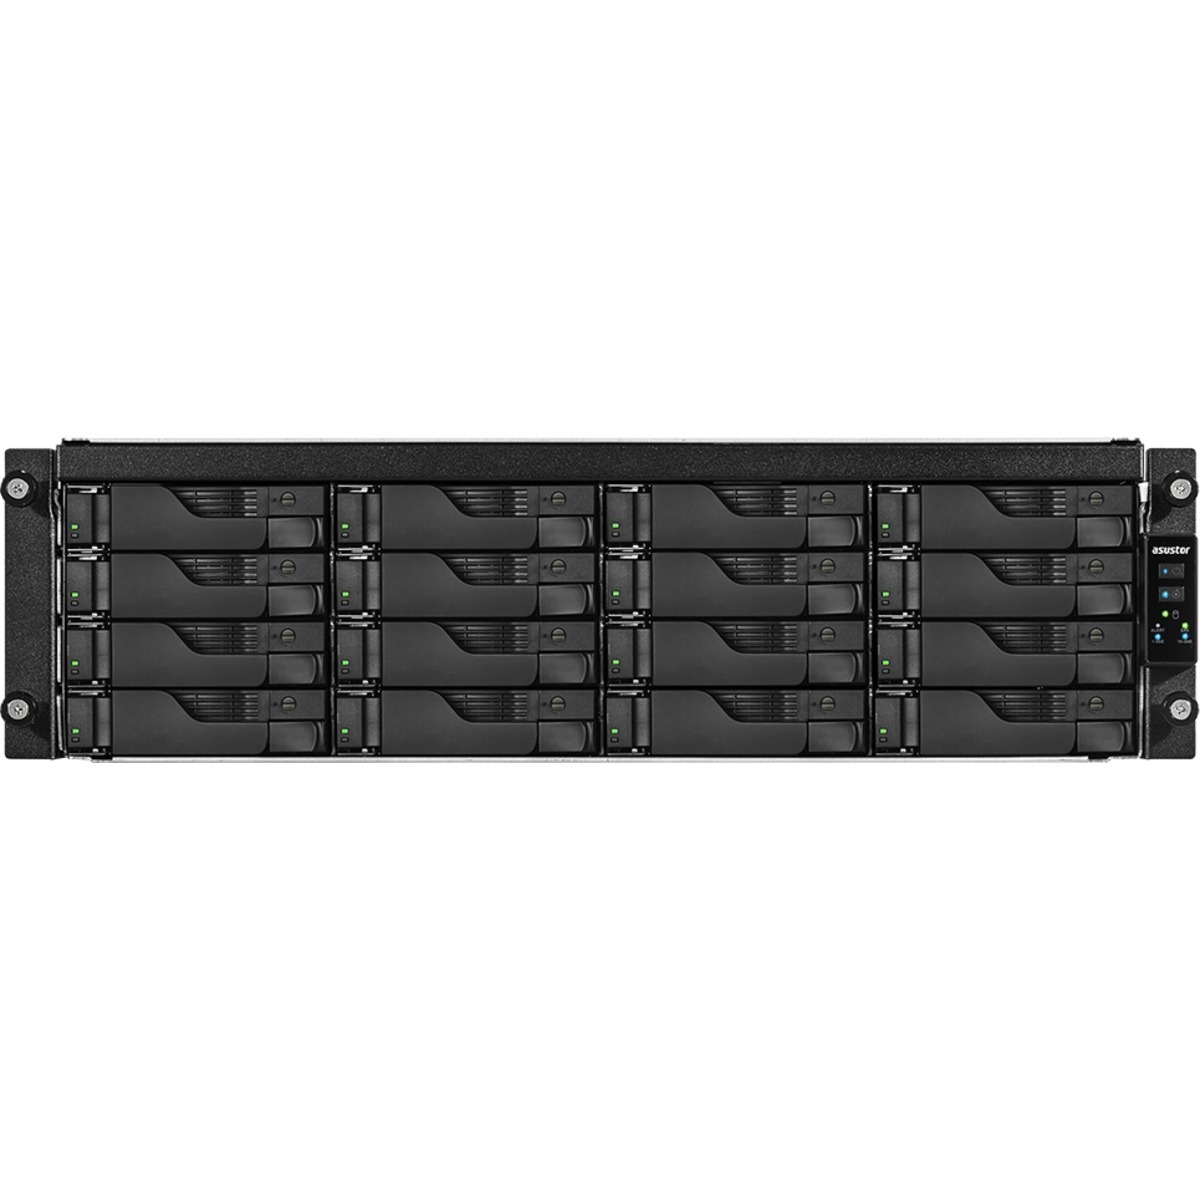 ASUSTOR AS7116RDX Lockerstor 16R Pro 256tb 16-Bay RackMount Large Business / Enterprise NAS - Network Attached Storage Device 16x16tb Western Digital Ultrastar DC HC550 WUH721816ALE6L4 3.5 7200rpm SATA 6Gb/s HDD ENTERPRISE Class Drives Installed - Burn-In Tested AS7116RDX Lockerstor 16R Pro